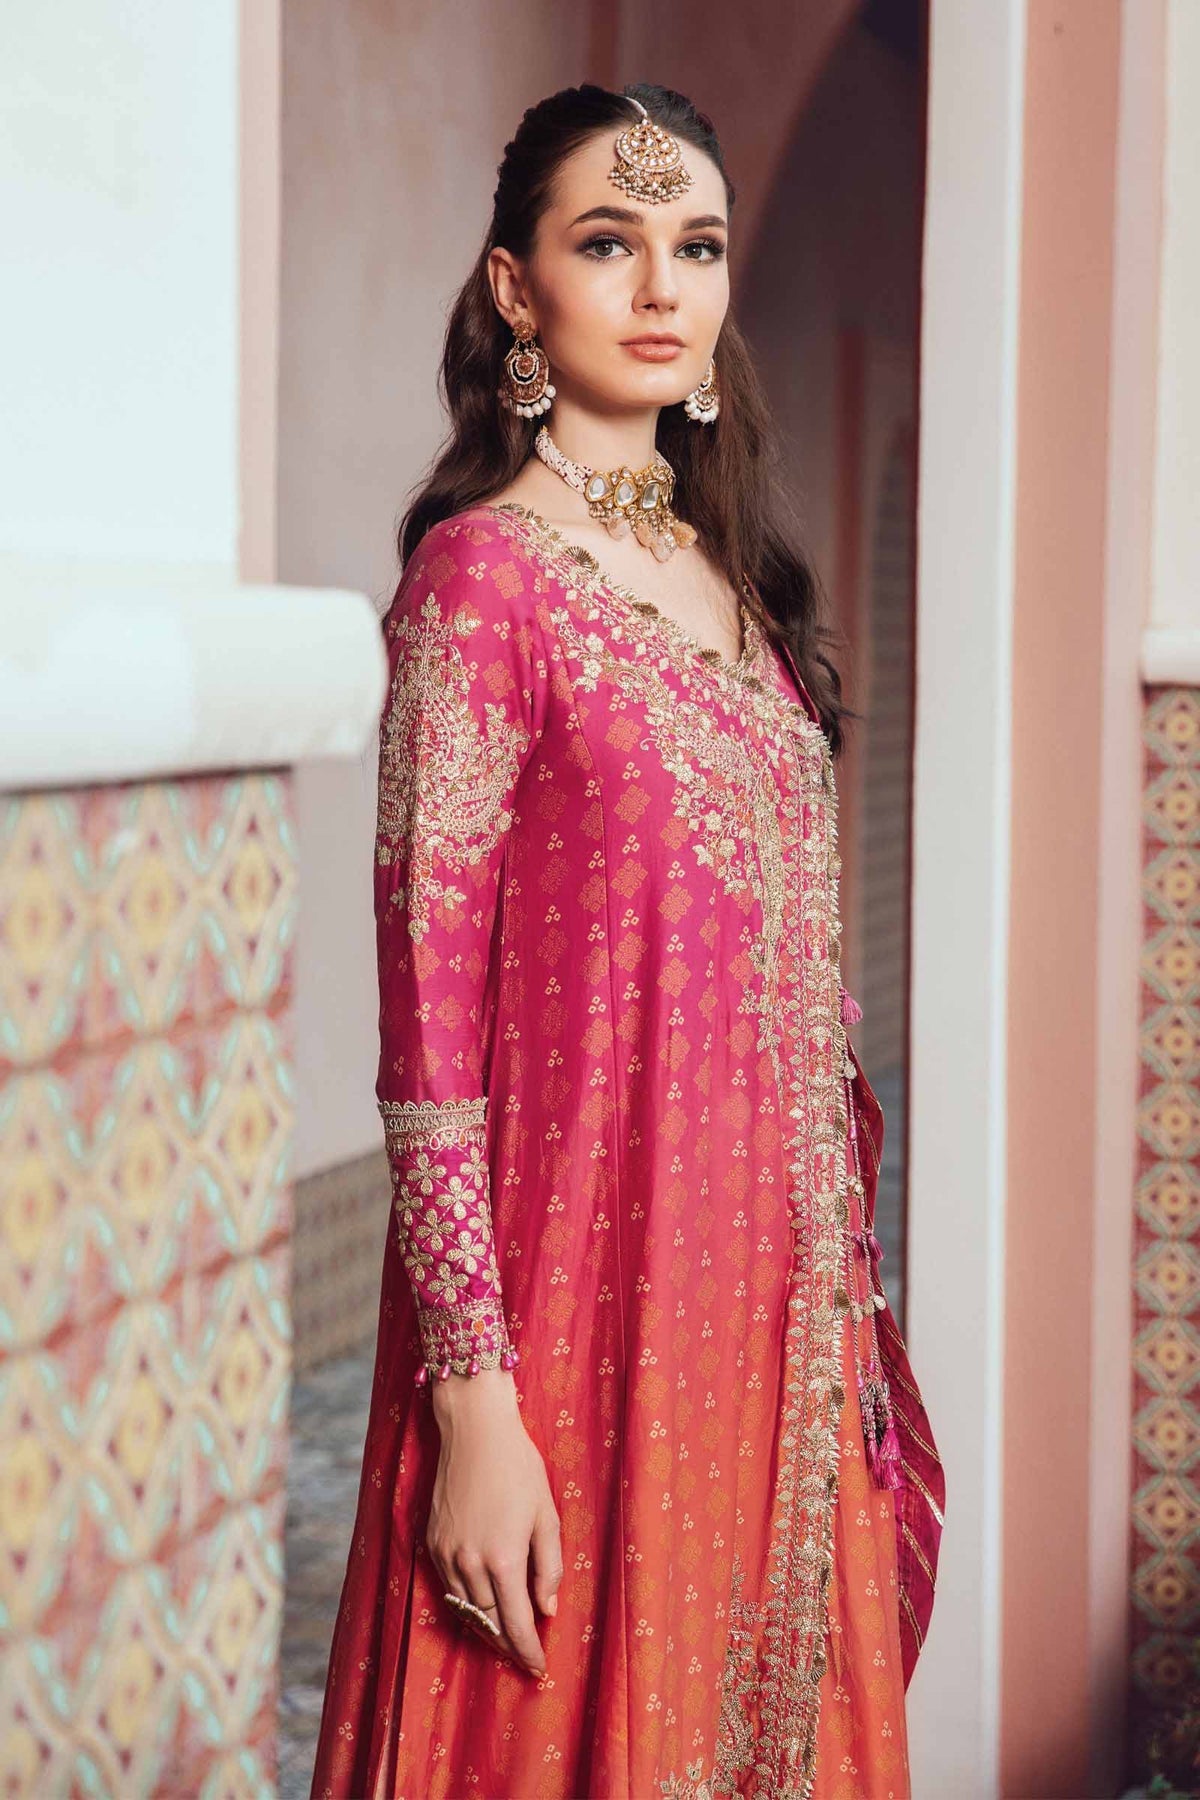 Buy Now, D#9 - Fuschia Pink - Maria. B Sateen 2023 - Wedding and Bridal Party Dresses -  Pakistani Festive wear - Maria. B in UK - Fall Collection'23